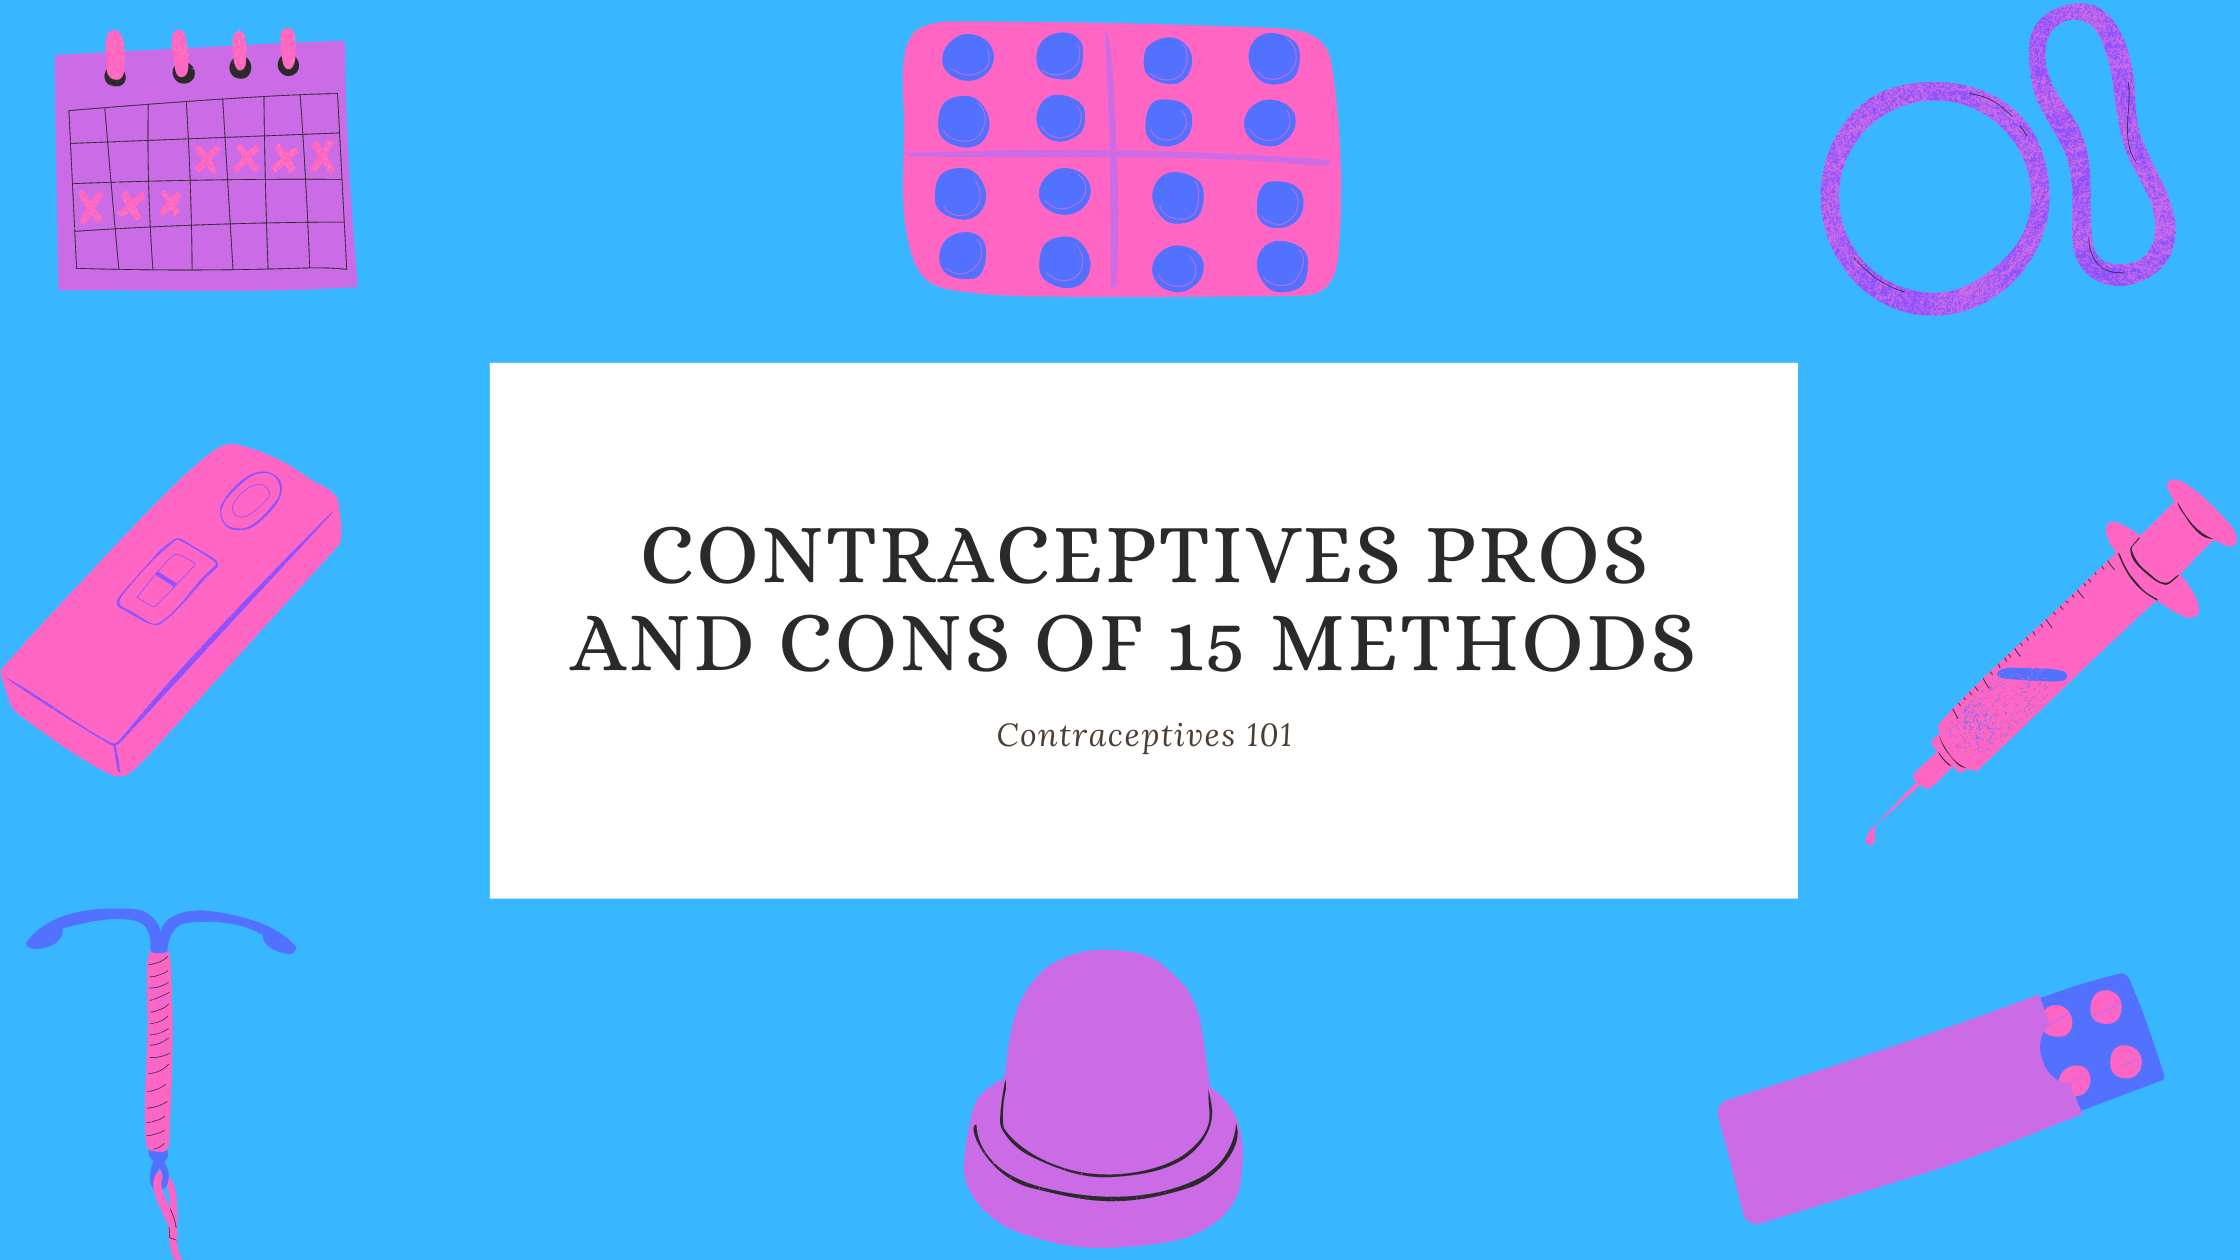 Contraceptives Pros and Cons of 15 Methods